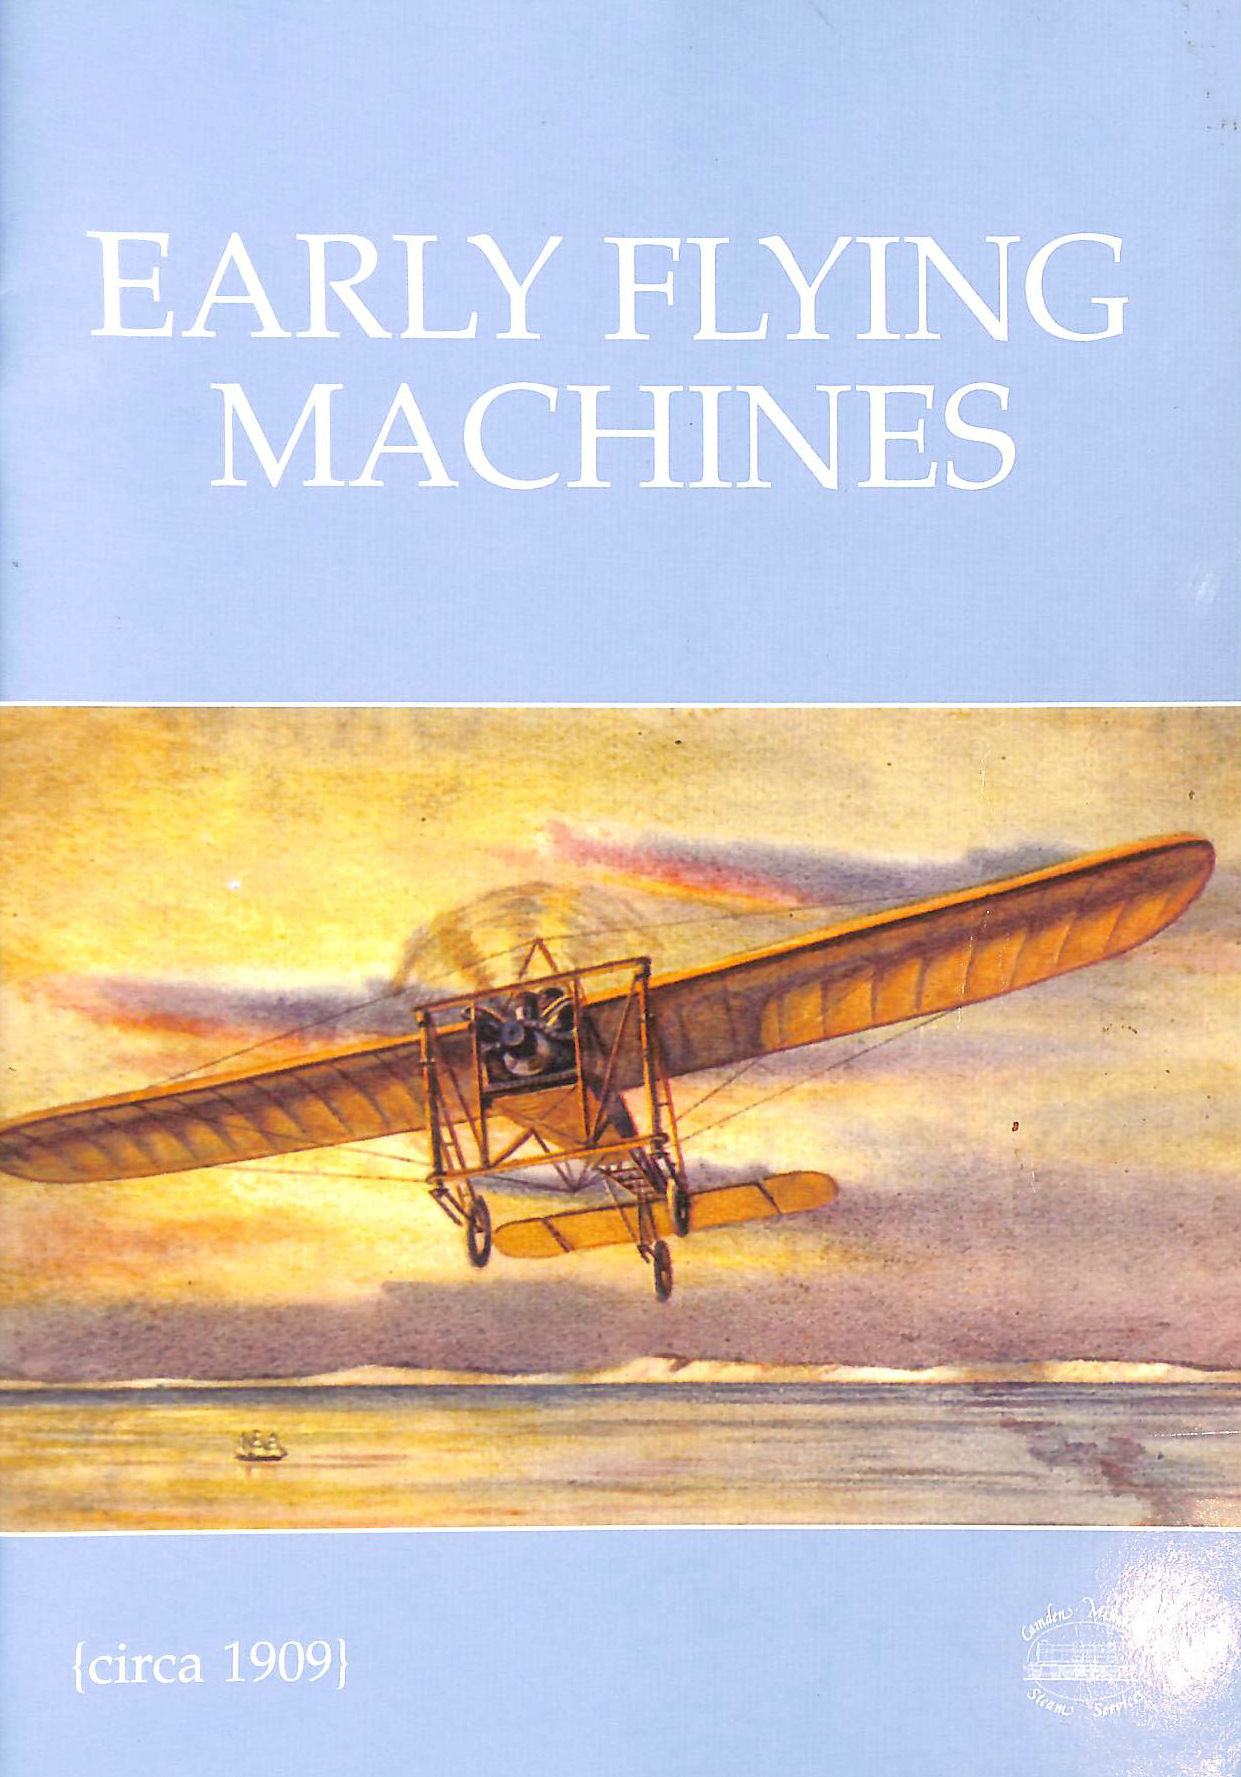 ANON - Early Flying Machines